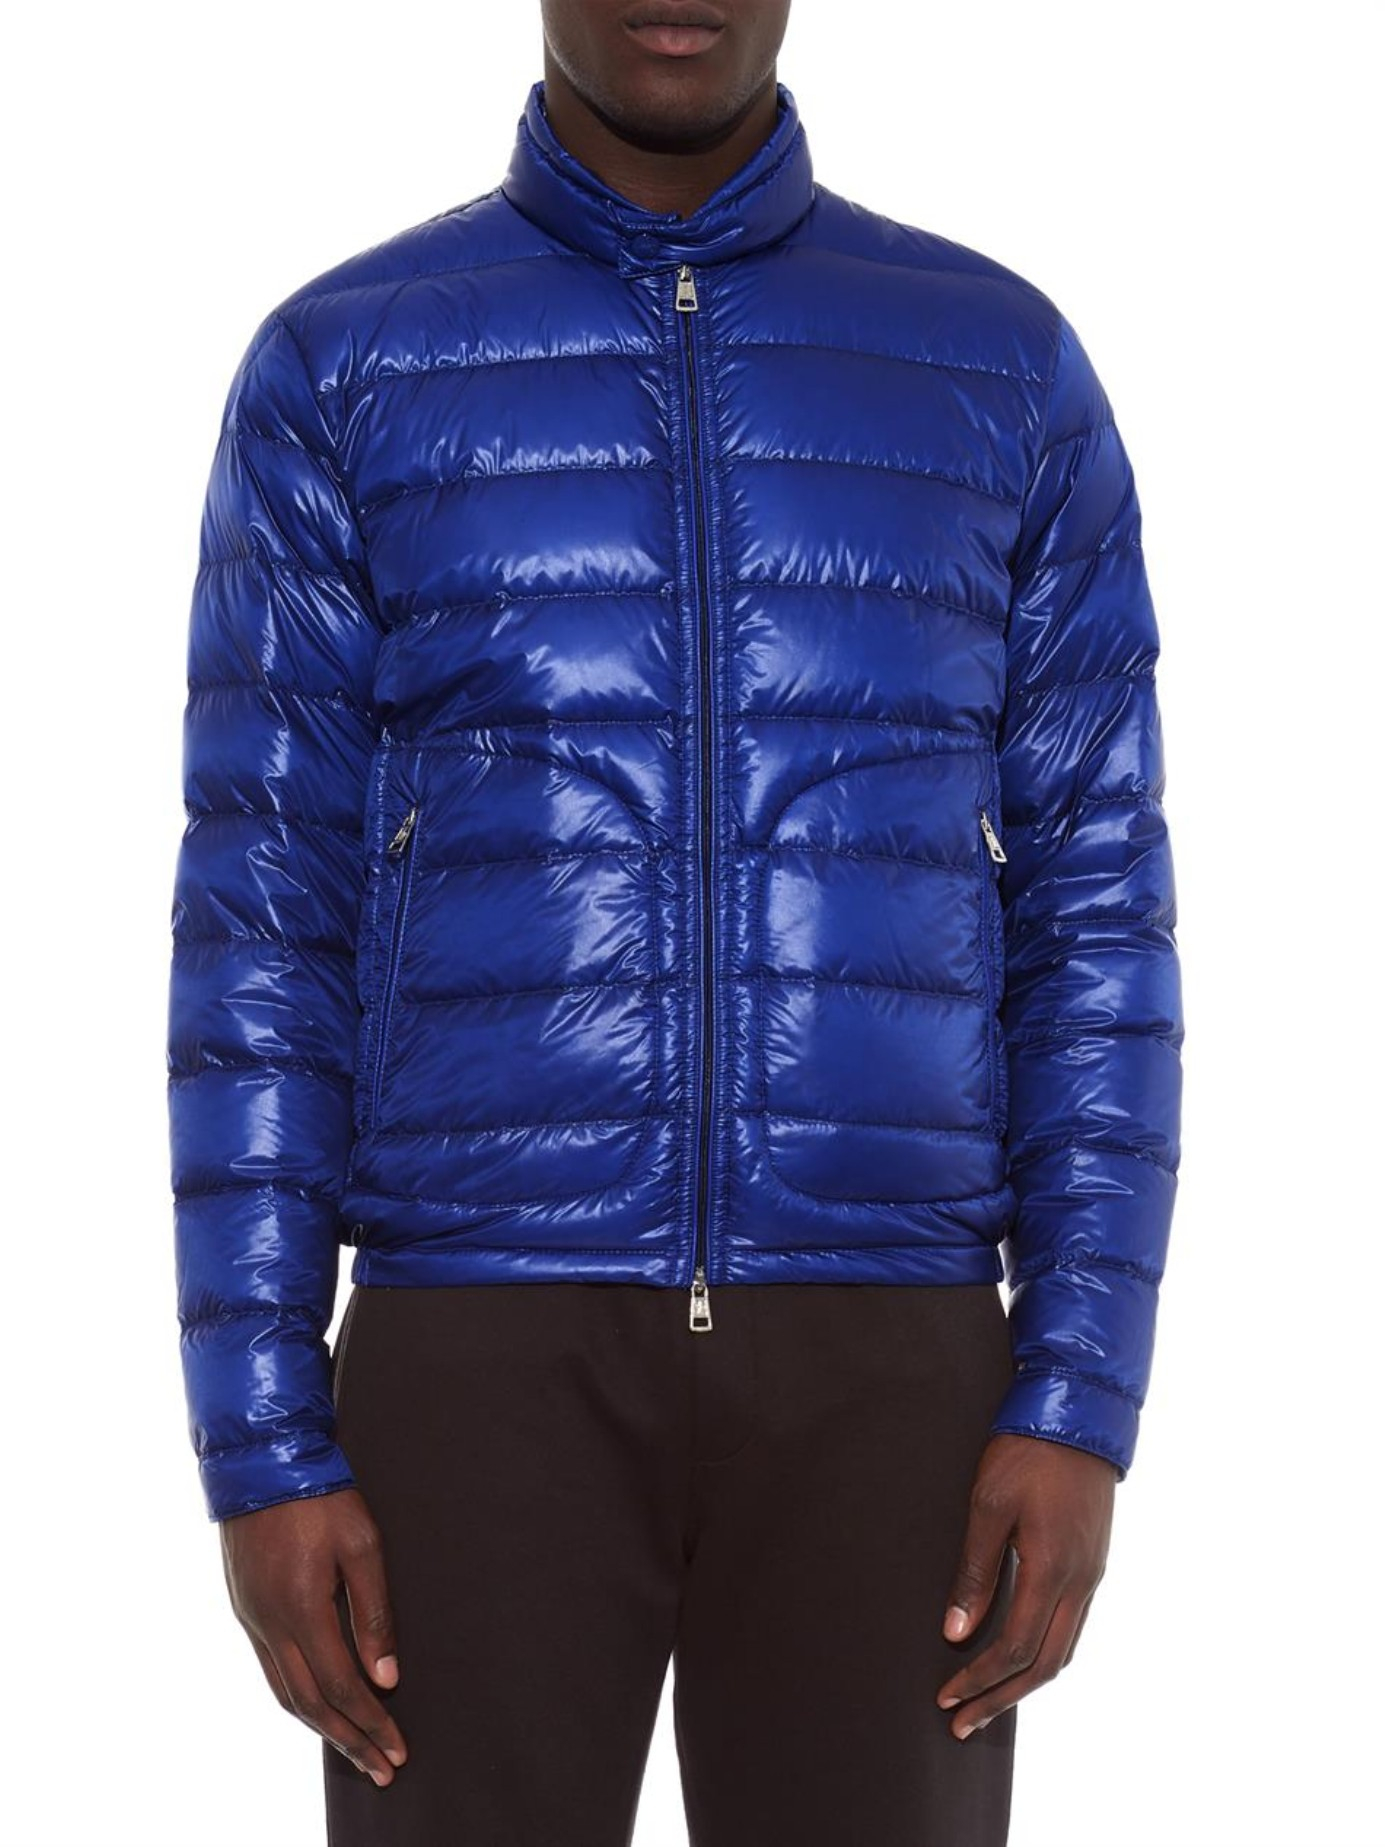 Moncler Acorus Giubbotto Quilted Down Jacket in Blue for Men - Lyst